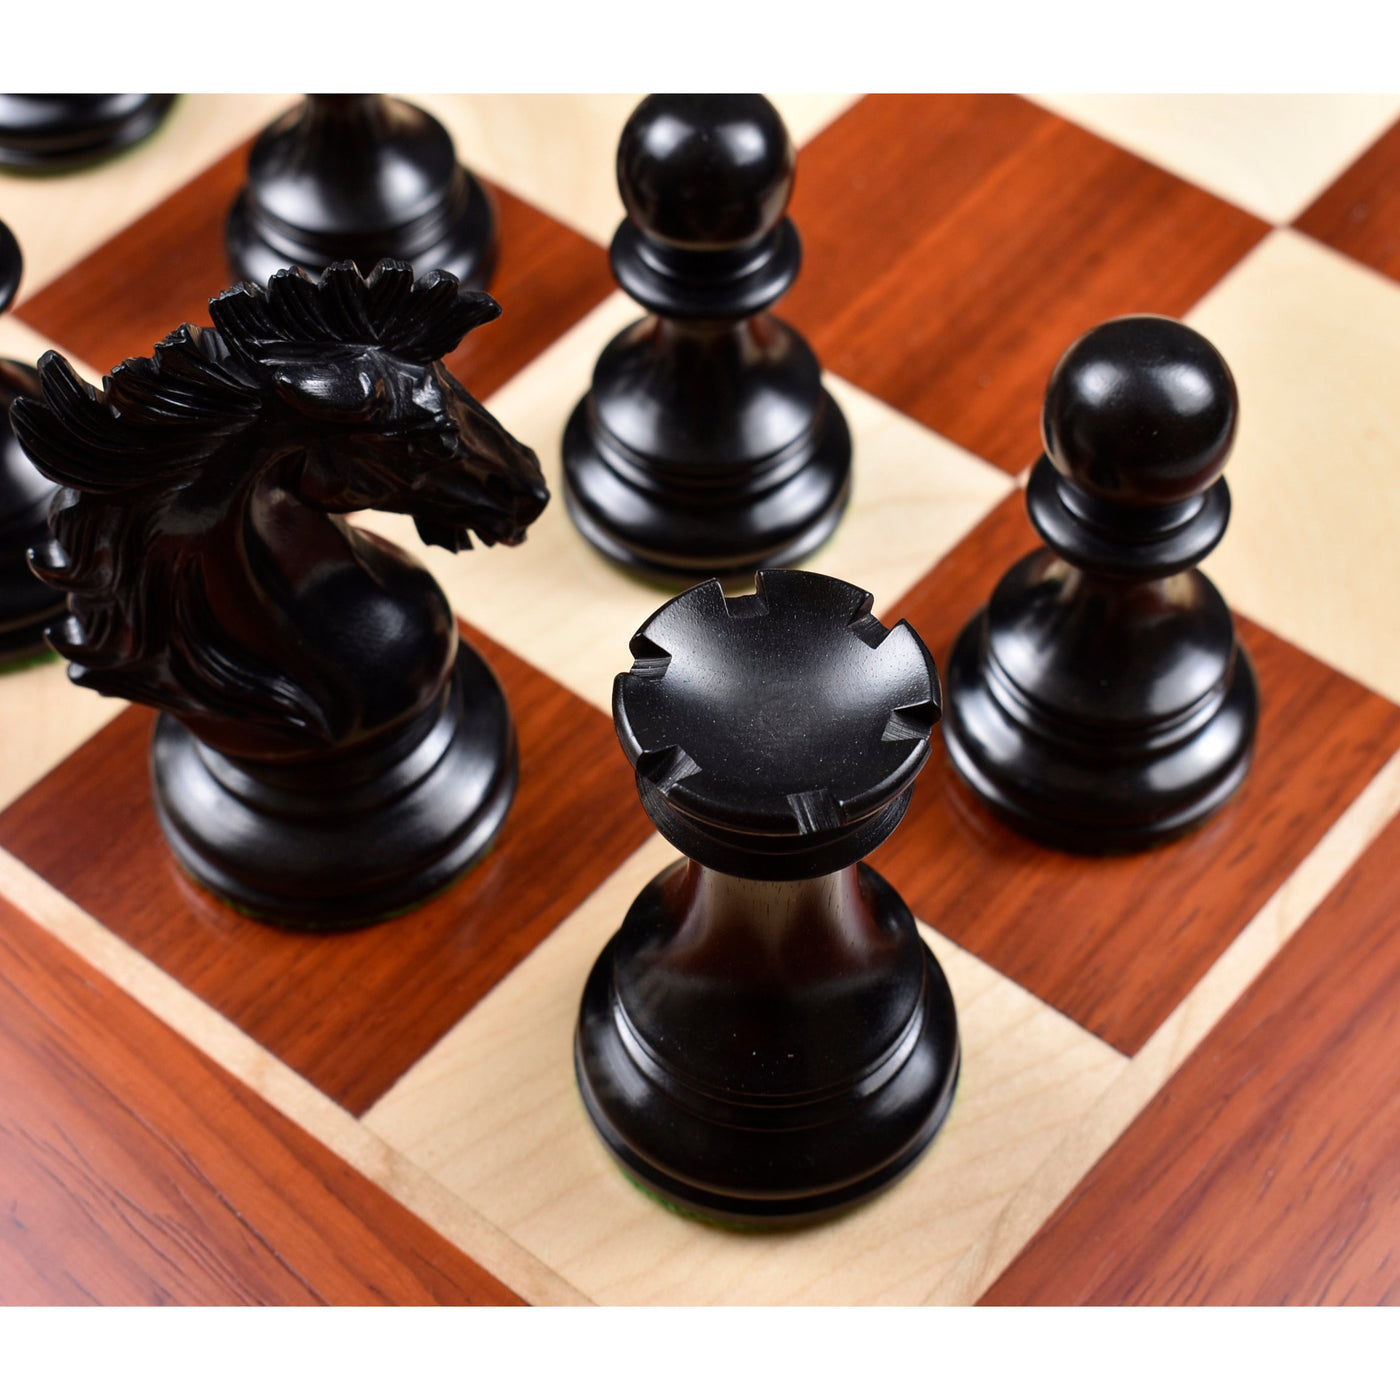 Combo of Alexandria Luxury Staunton Chess Set - Pieces in Ebony & Bud Rosewood with Board and Box